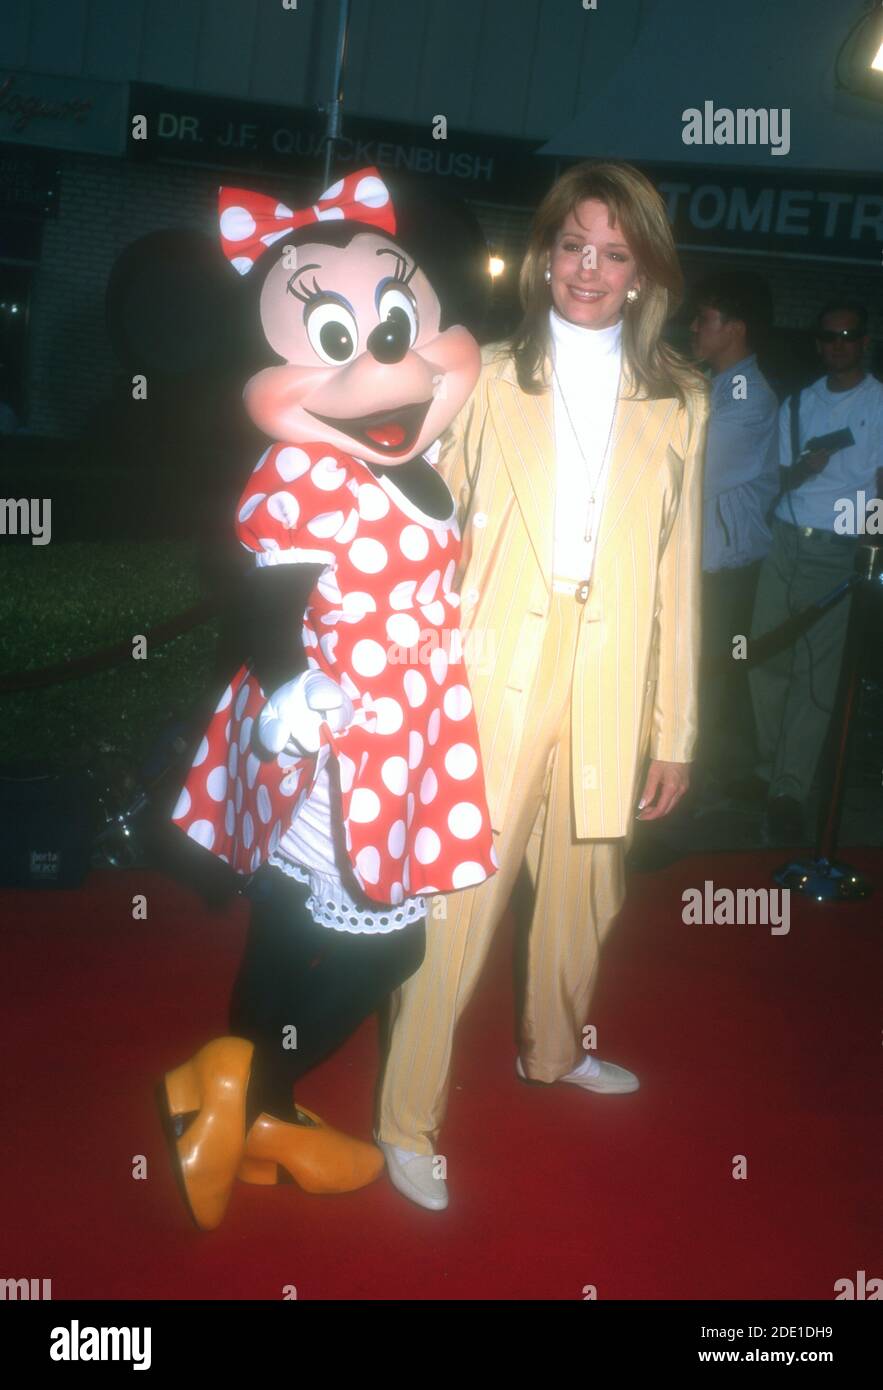 Westwood, California, USA 18th April 1996 Minnie Mouse, and actress Deidre Hall attend Disney's 'The Arisocats' Video Release and Special Screening on April 18, 1996 at Mann Village Theatre in Westwood, California, USA. Photo by Barry King/Alamy Stock Photo Stock Photo